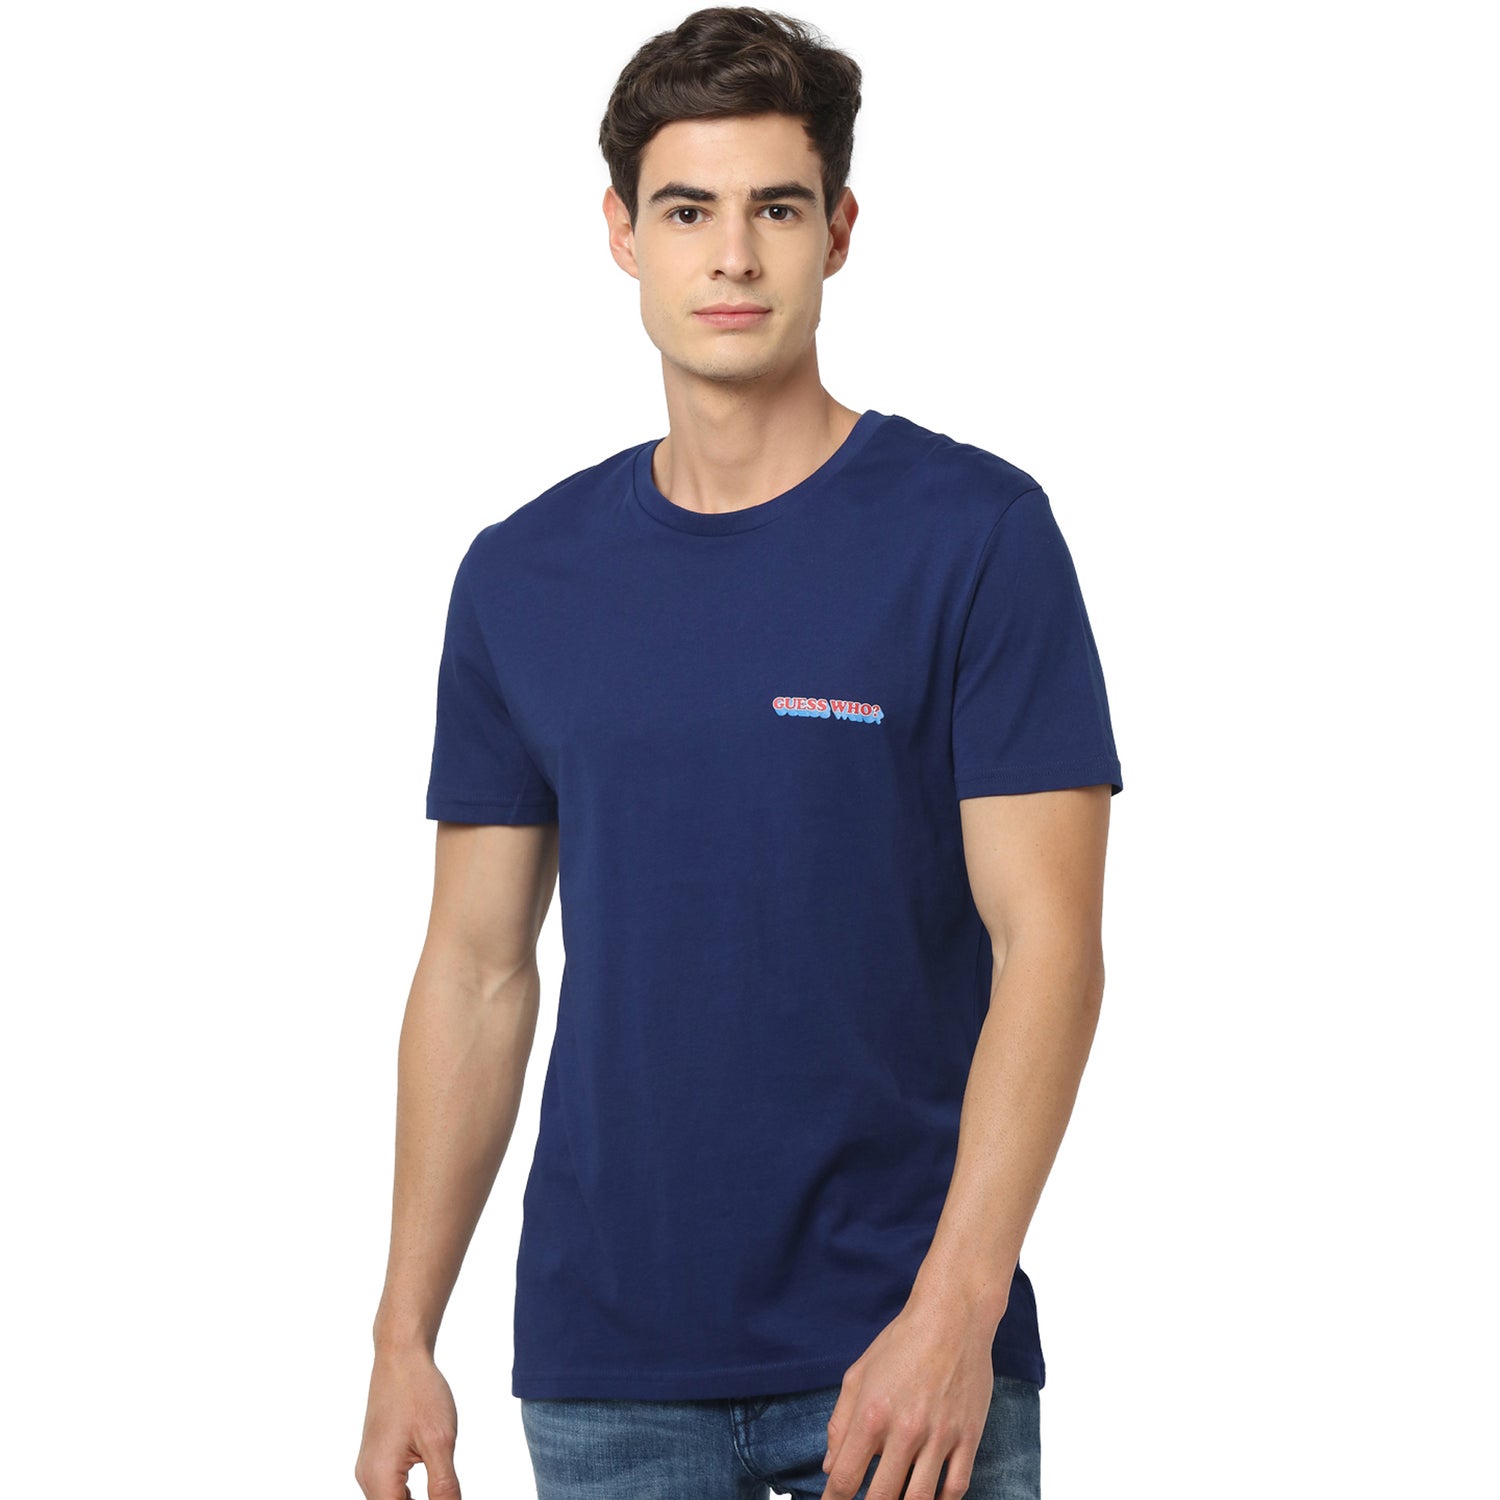 Navy Blue and Red Printed Round Neck Cotton T-shirt (LREBAR3)